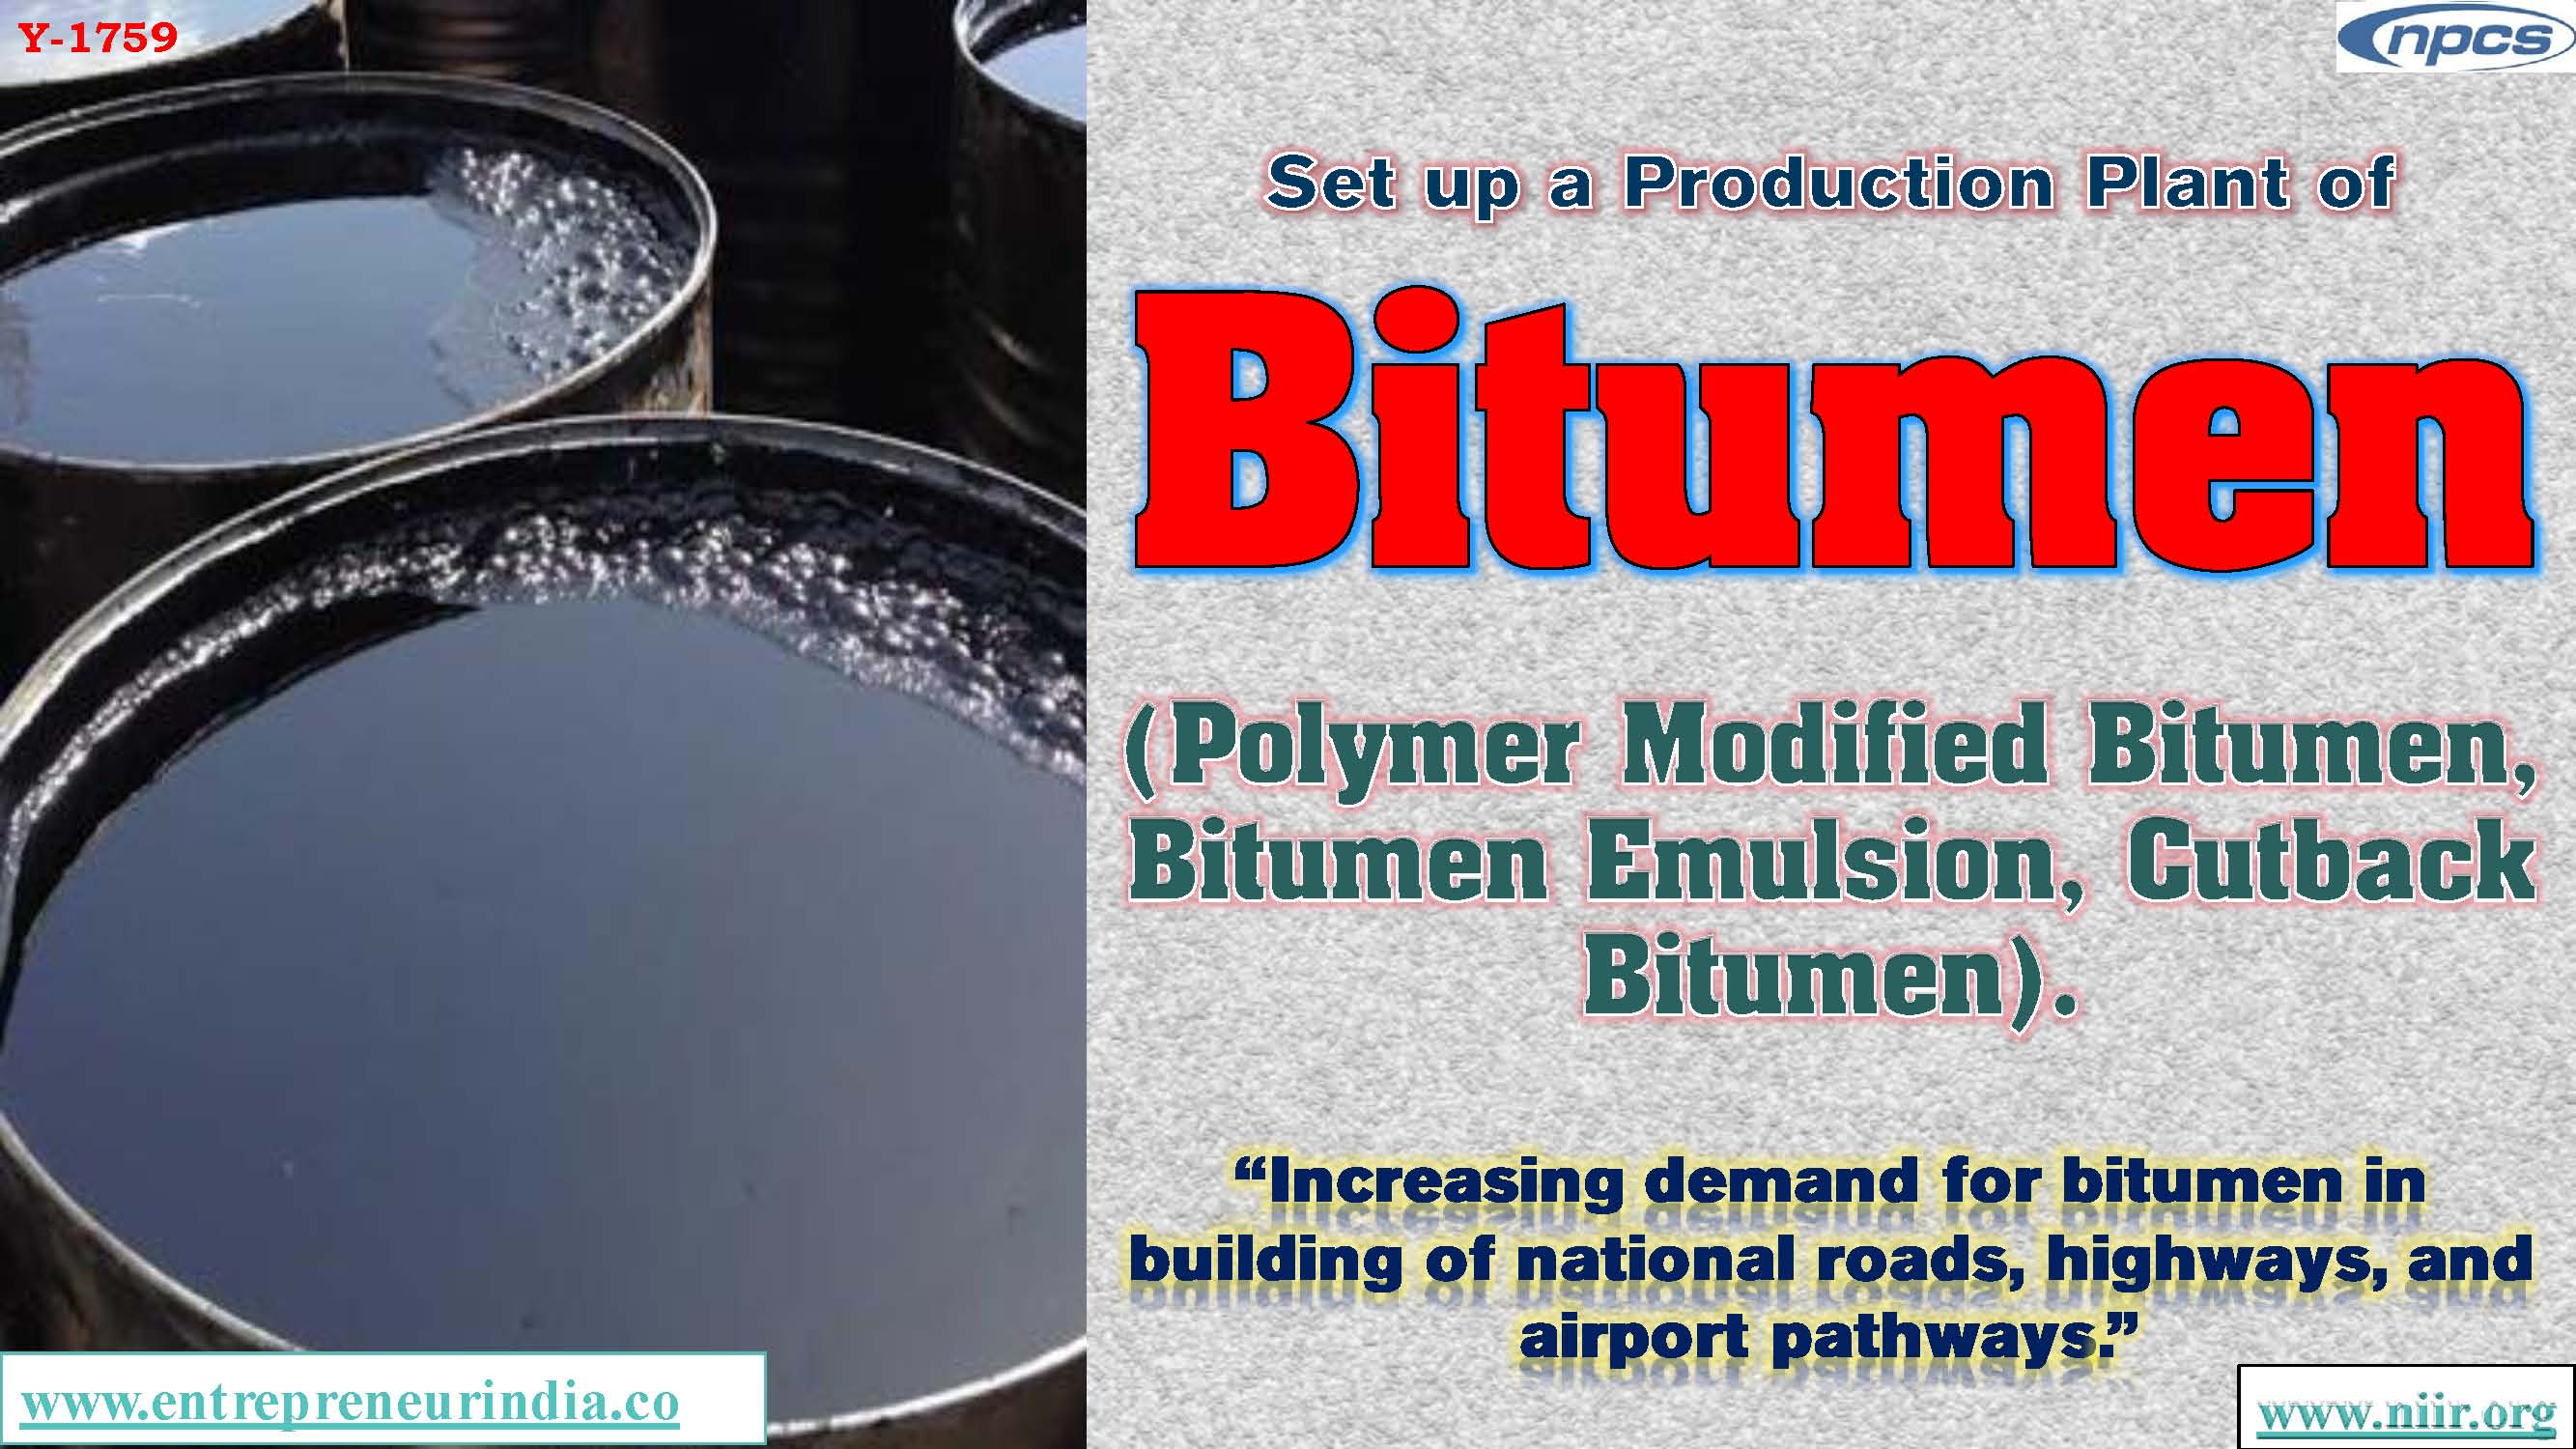 Set up a Production Plant of Bitumen, Polymer Modified Bitumen, Bitumen Emulsion, Cutback Bitumen Increasing demand for bitumen in building of national roads, highways, and airport pathways